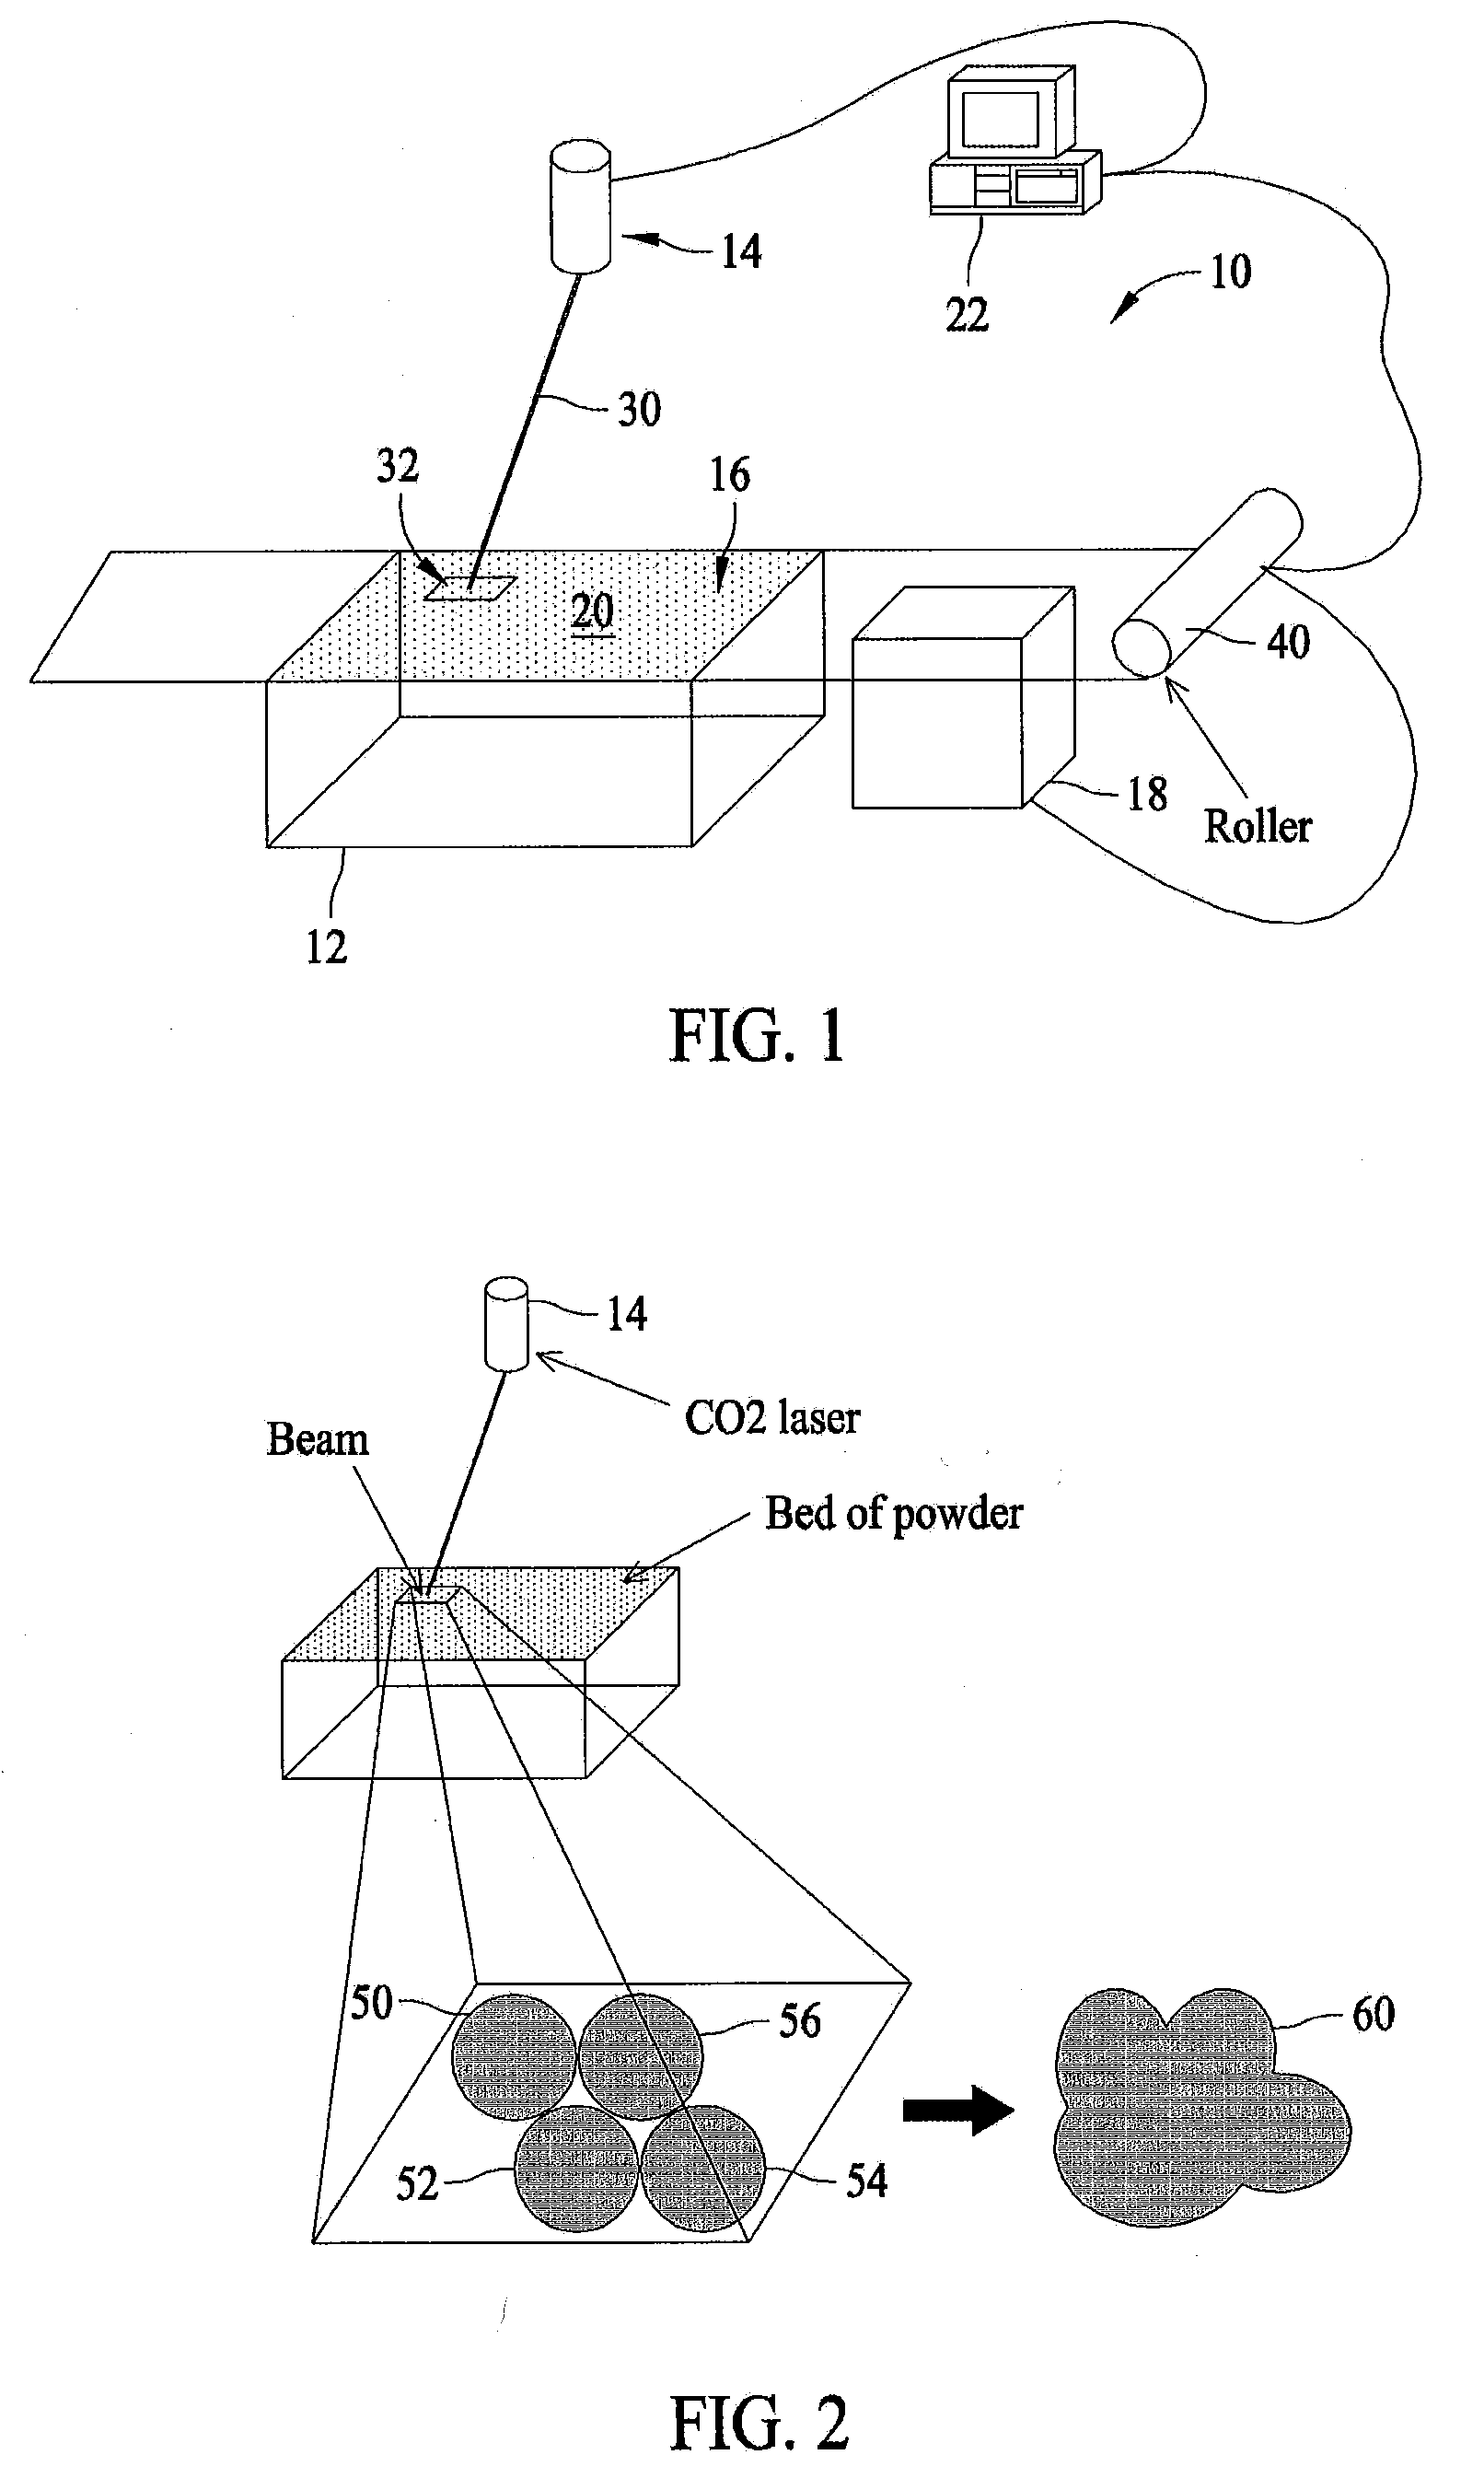 Methods and systems for fabricating fire retardant materials